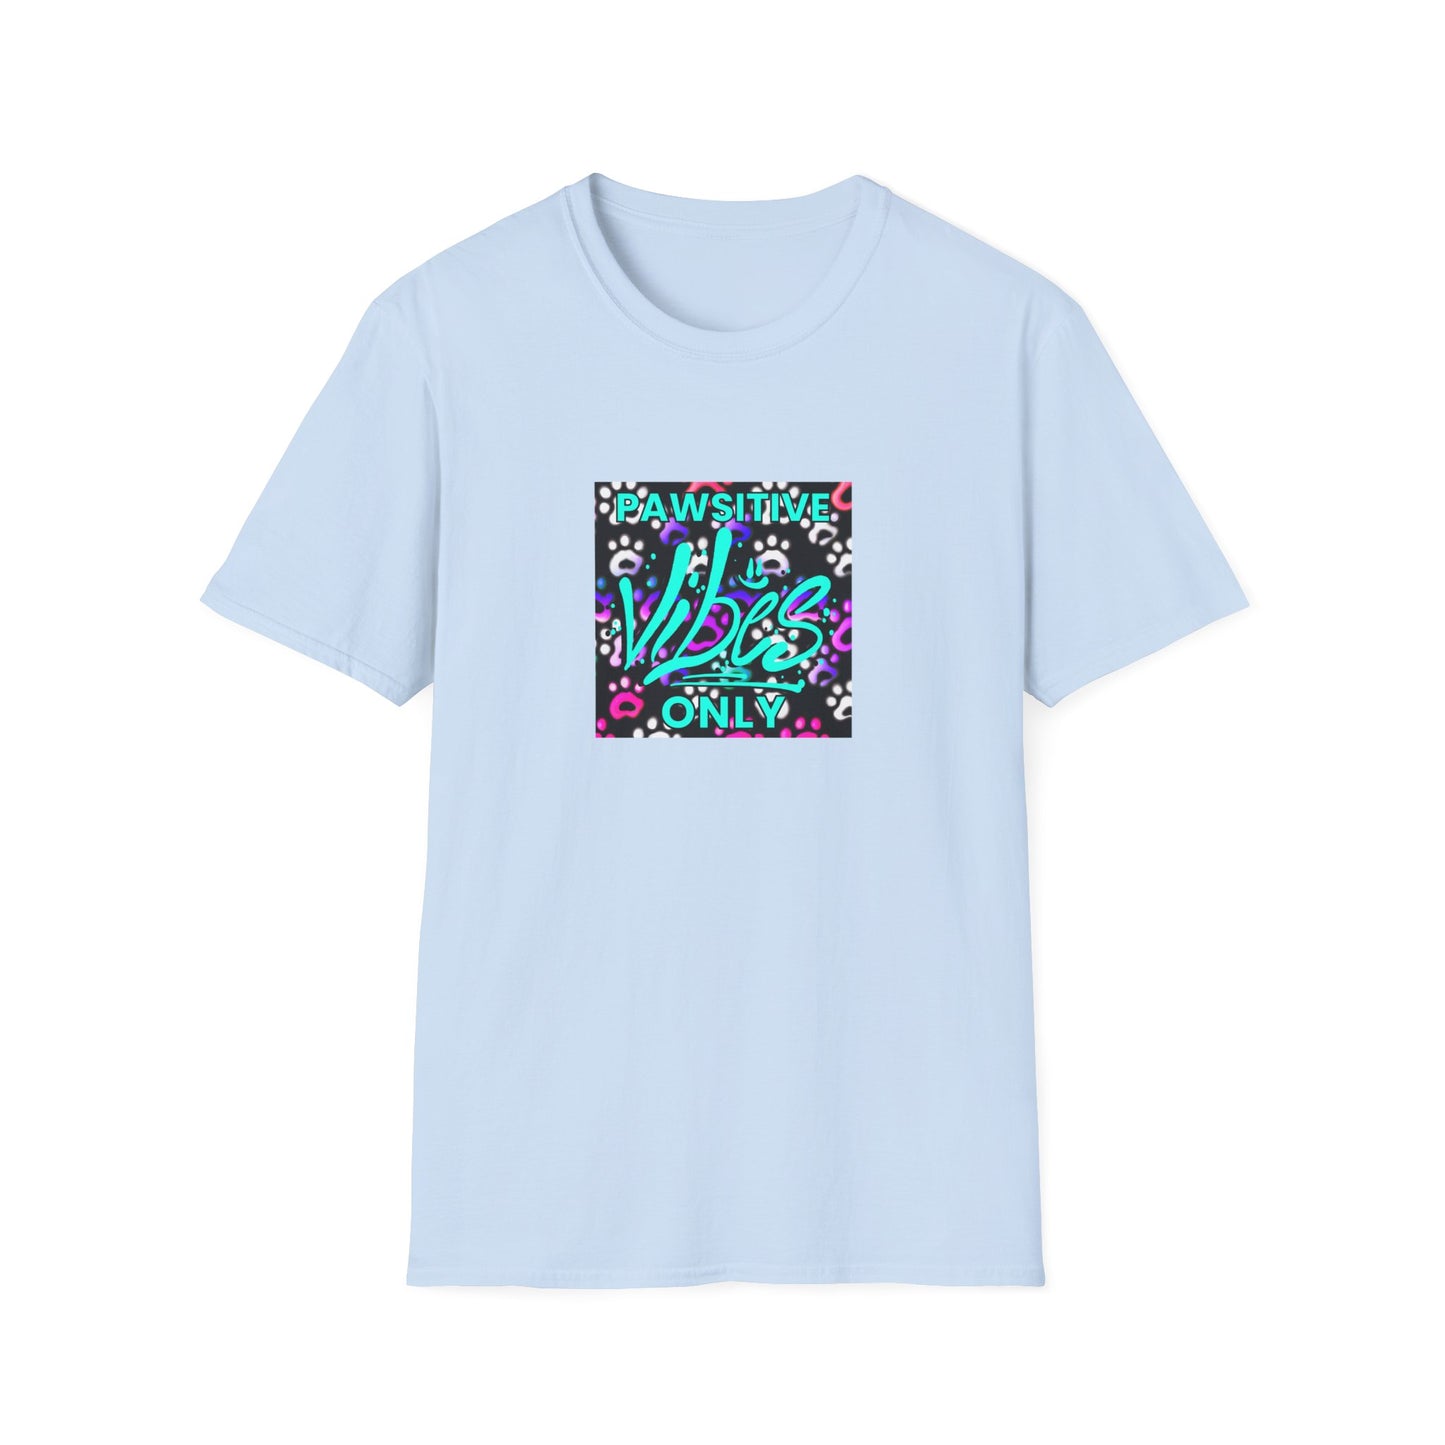 Positively Perceptive Pete. - "Pawsitive Vibes Only" Unisex Tee